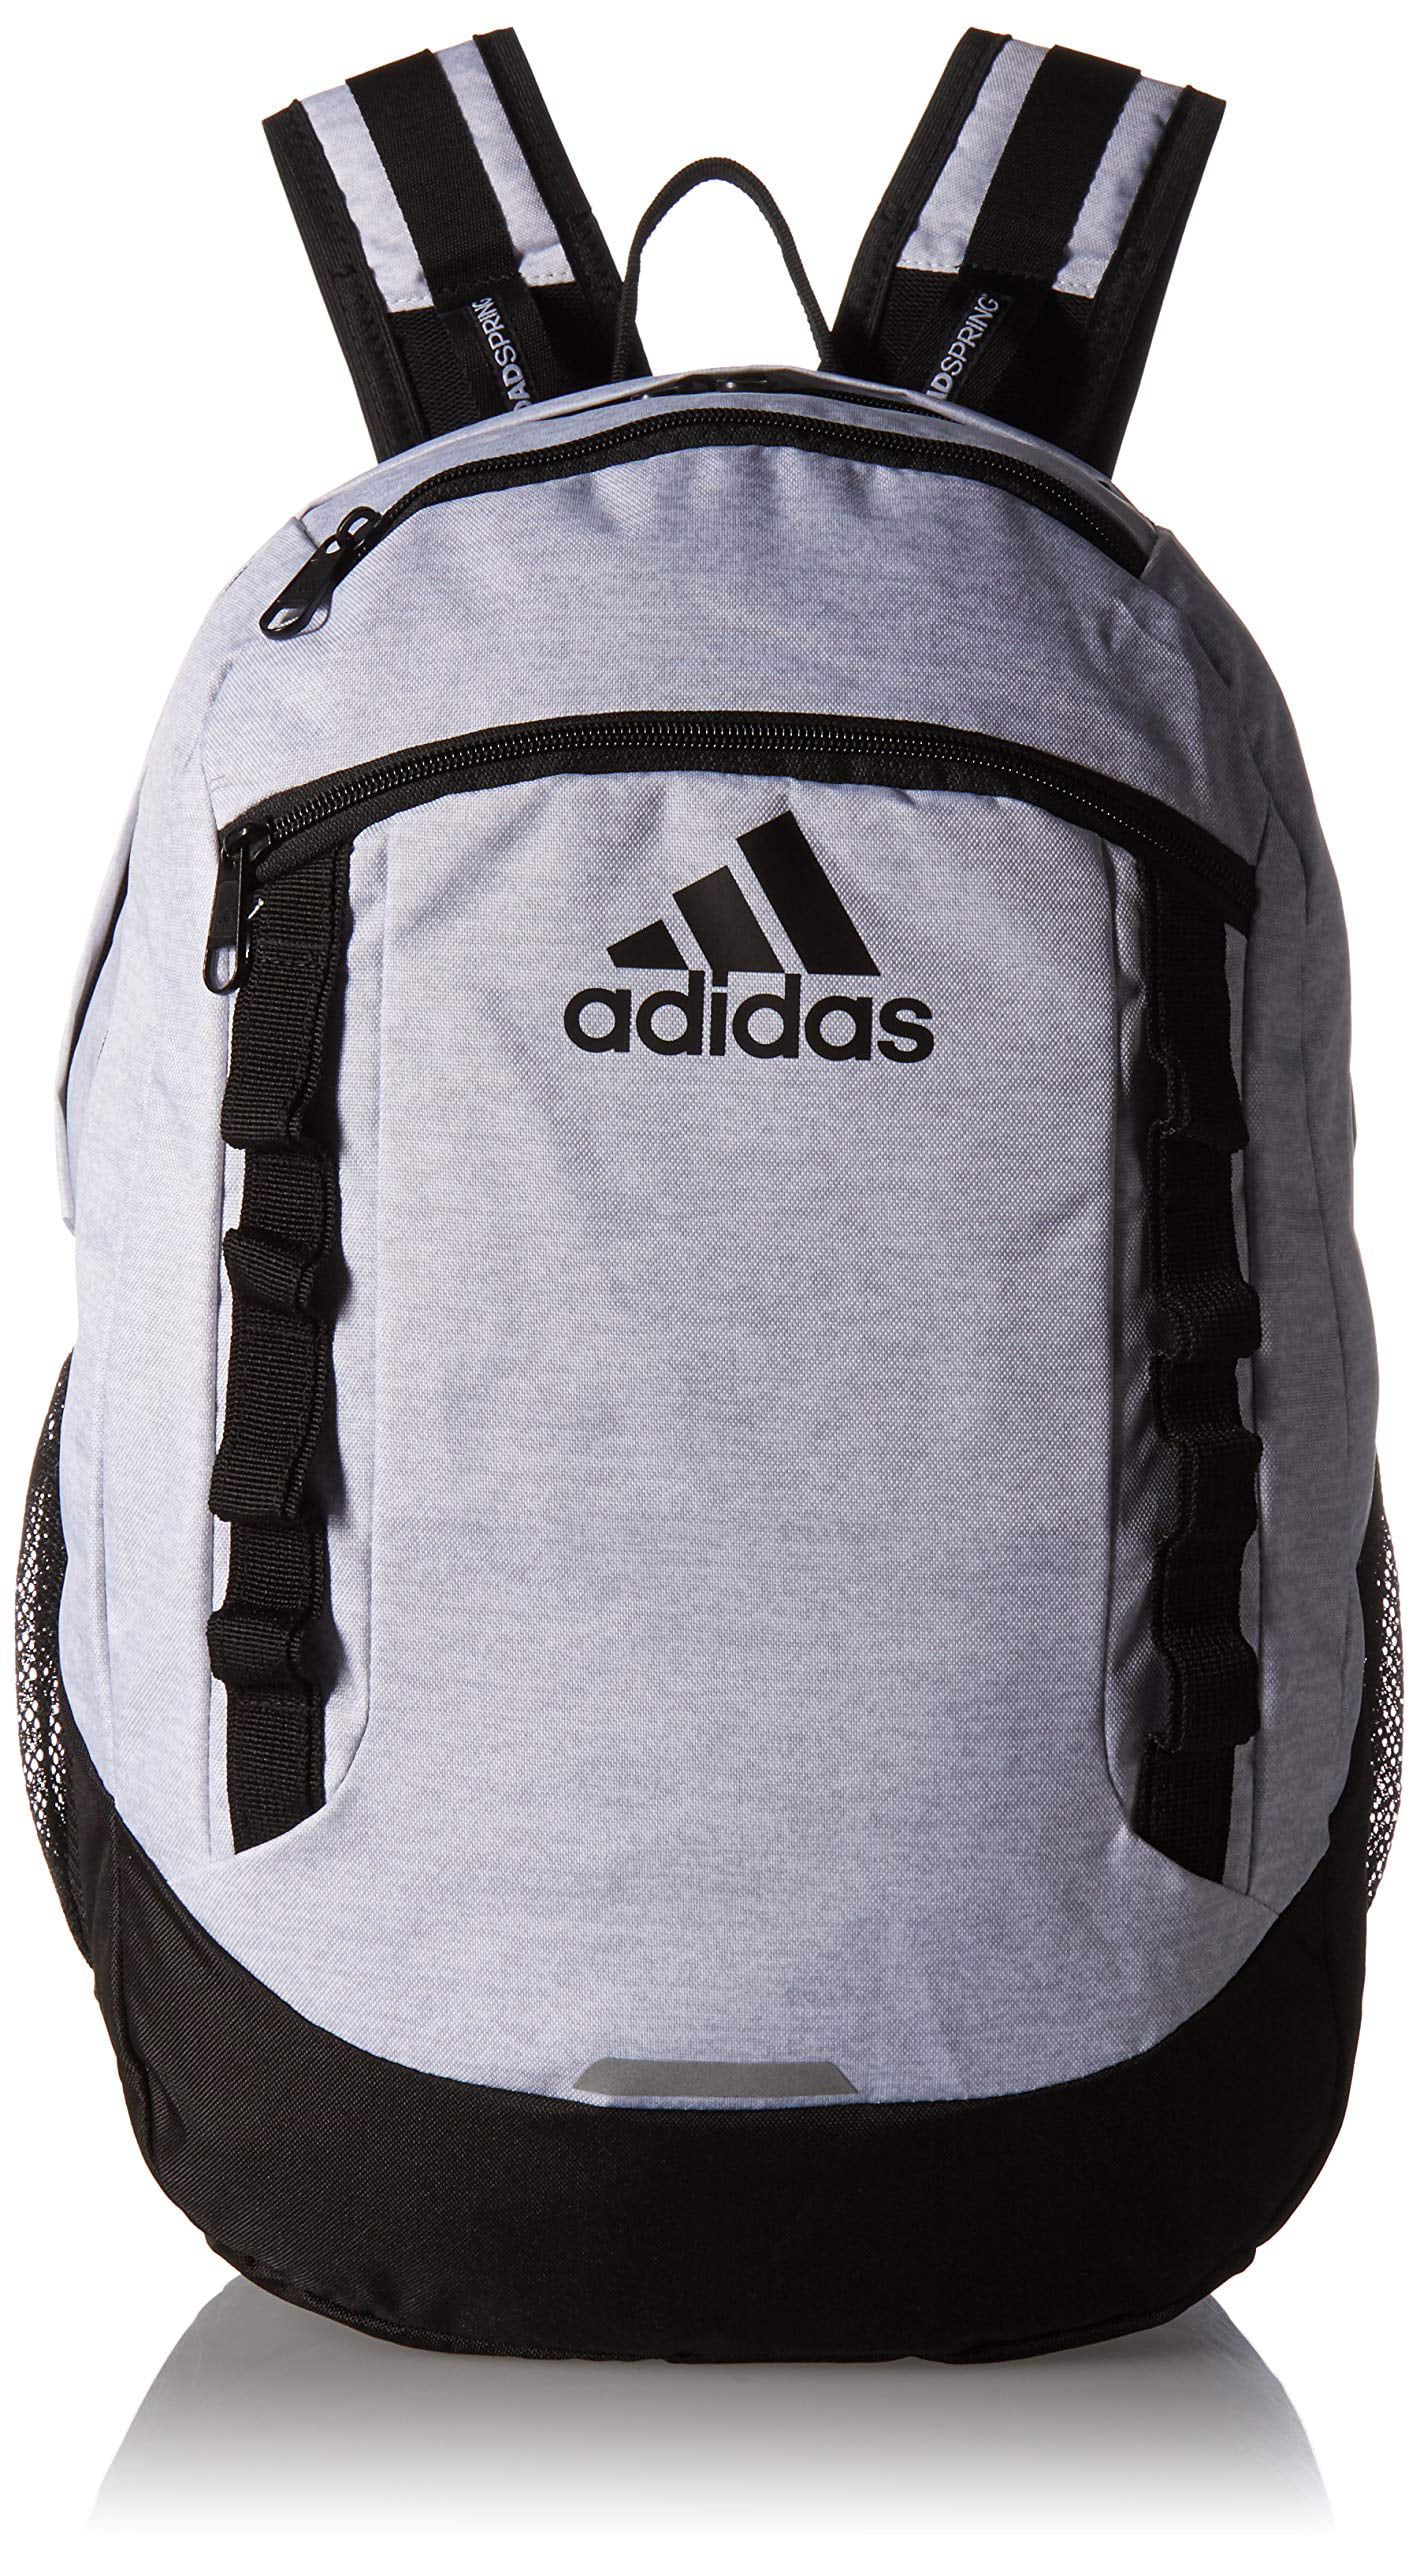 adidas Excel Backpack, Jersey White/Glow Blue, One Size - Walmart.com